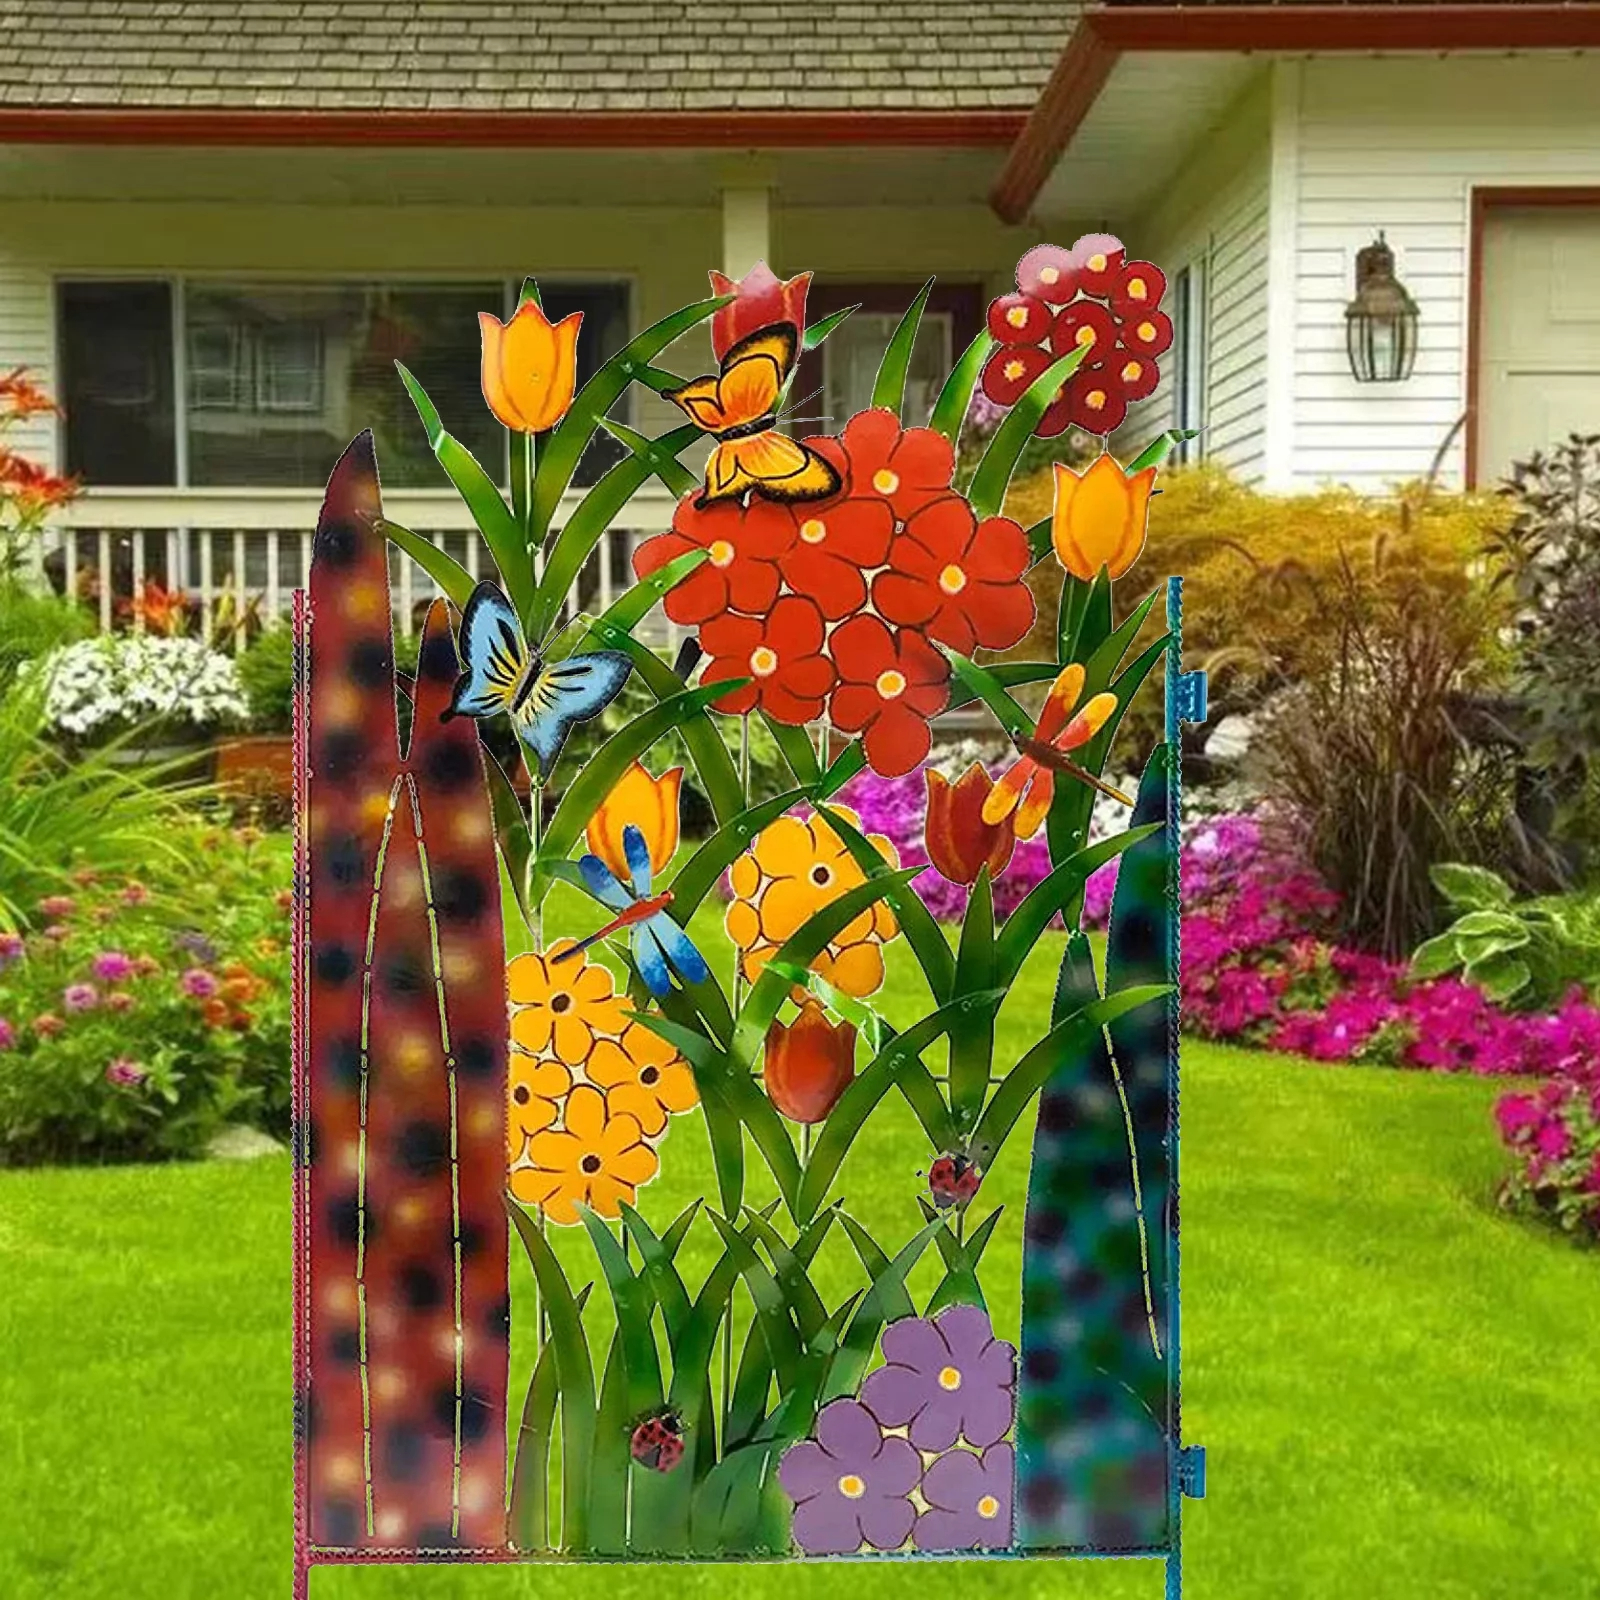 COLORFUL METAL BUTTERFLY AND FLOWER GARDEN SCREEN